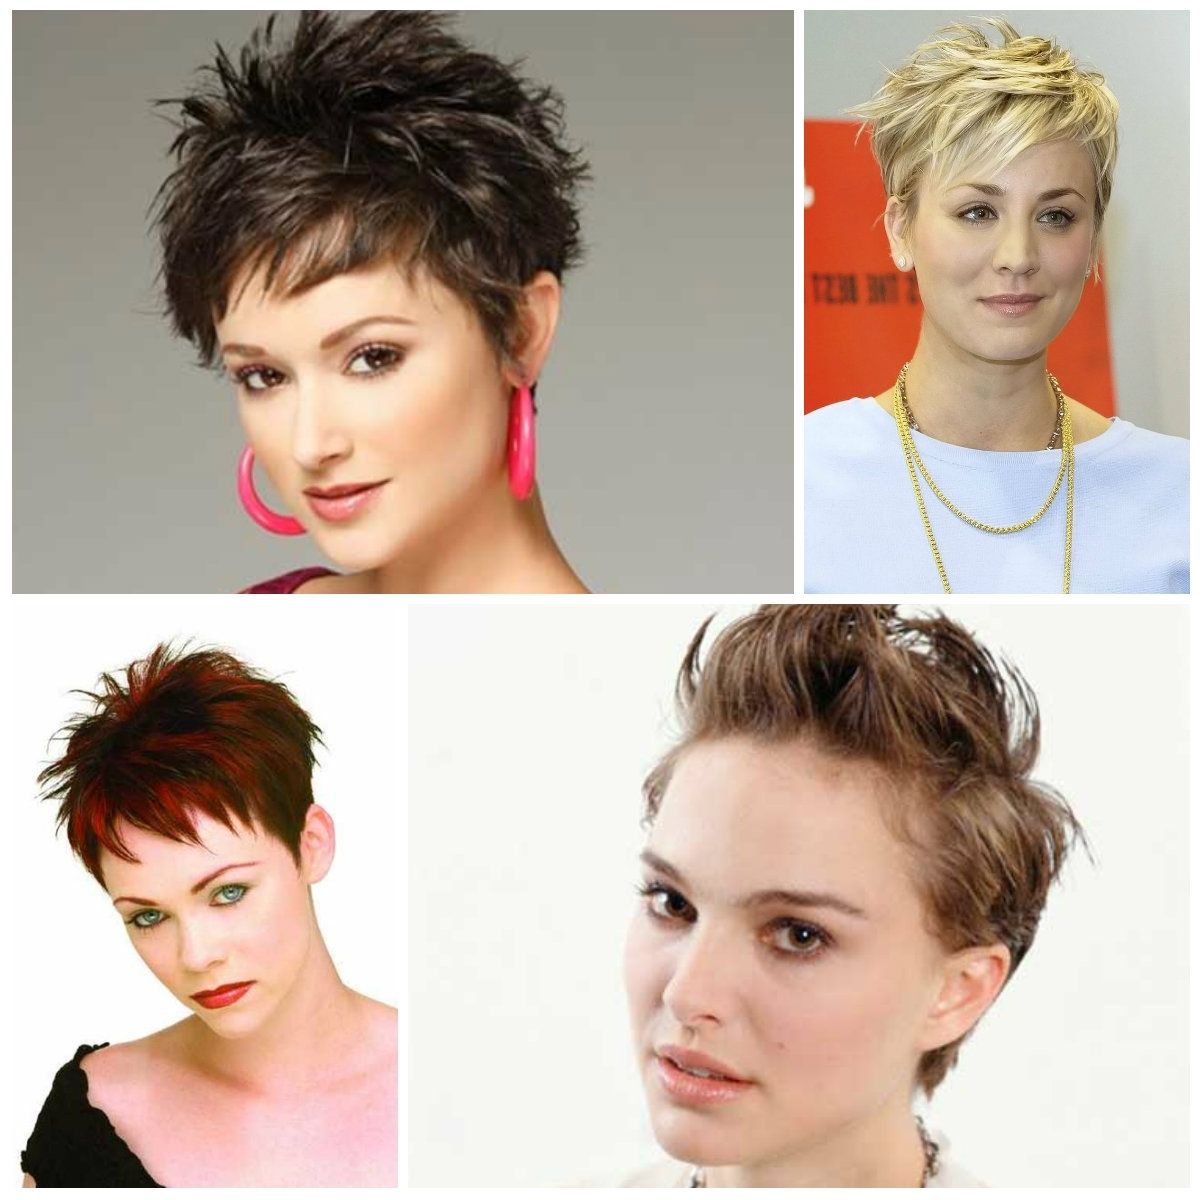 Pixie Hairstyles For 2017 – Hairstyles Ideas Intended For 2018 Long To Short Pixie Hairstyles (View 6 of 16)